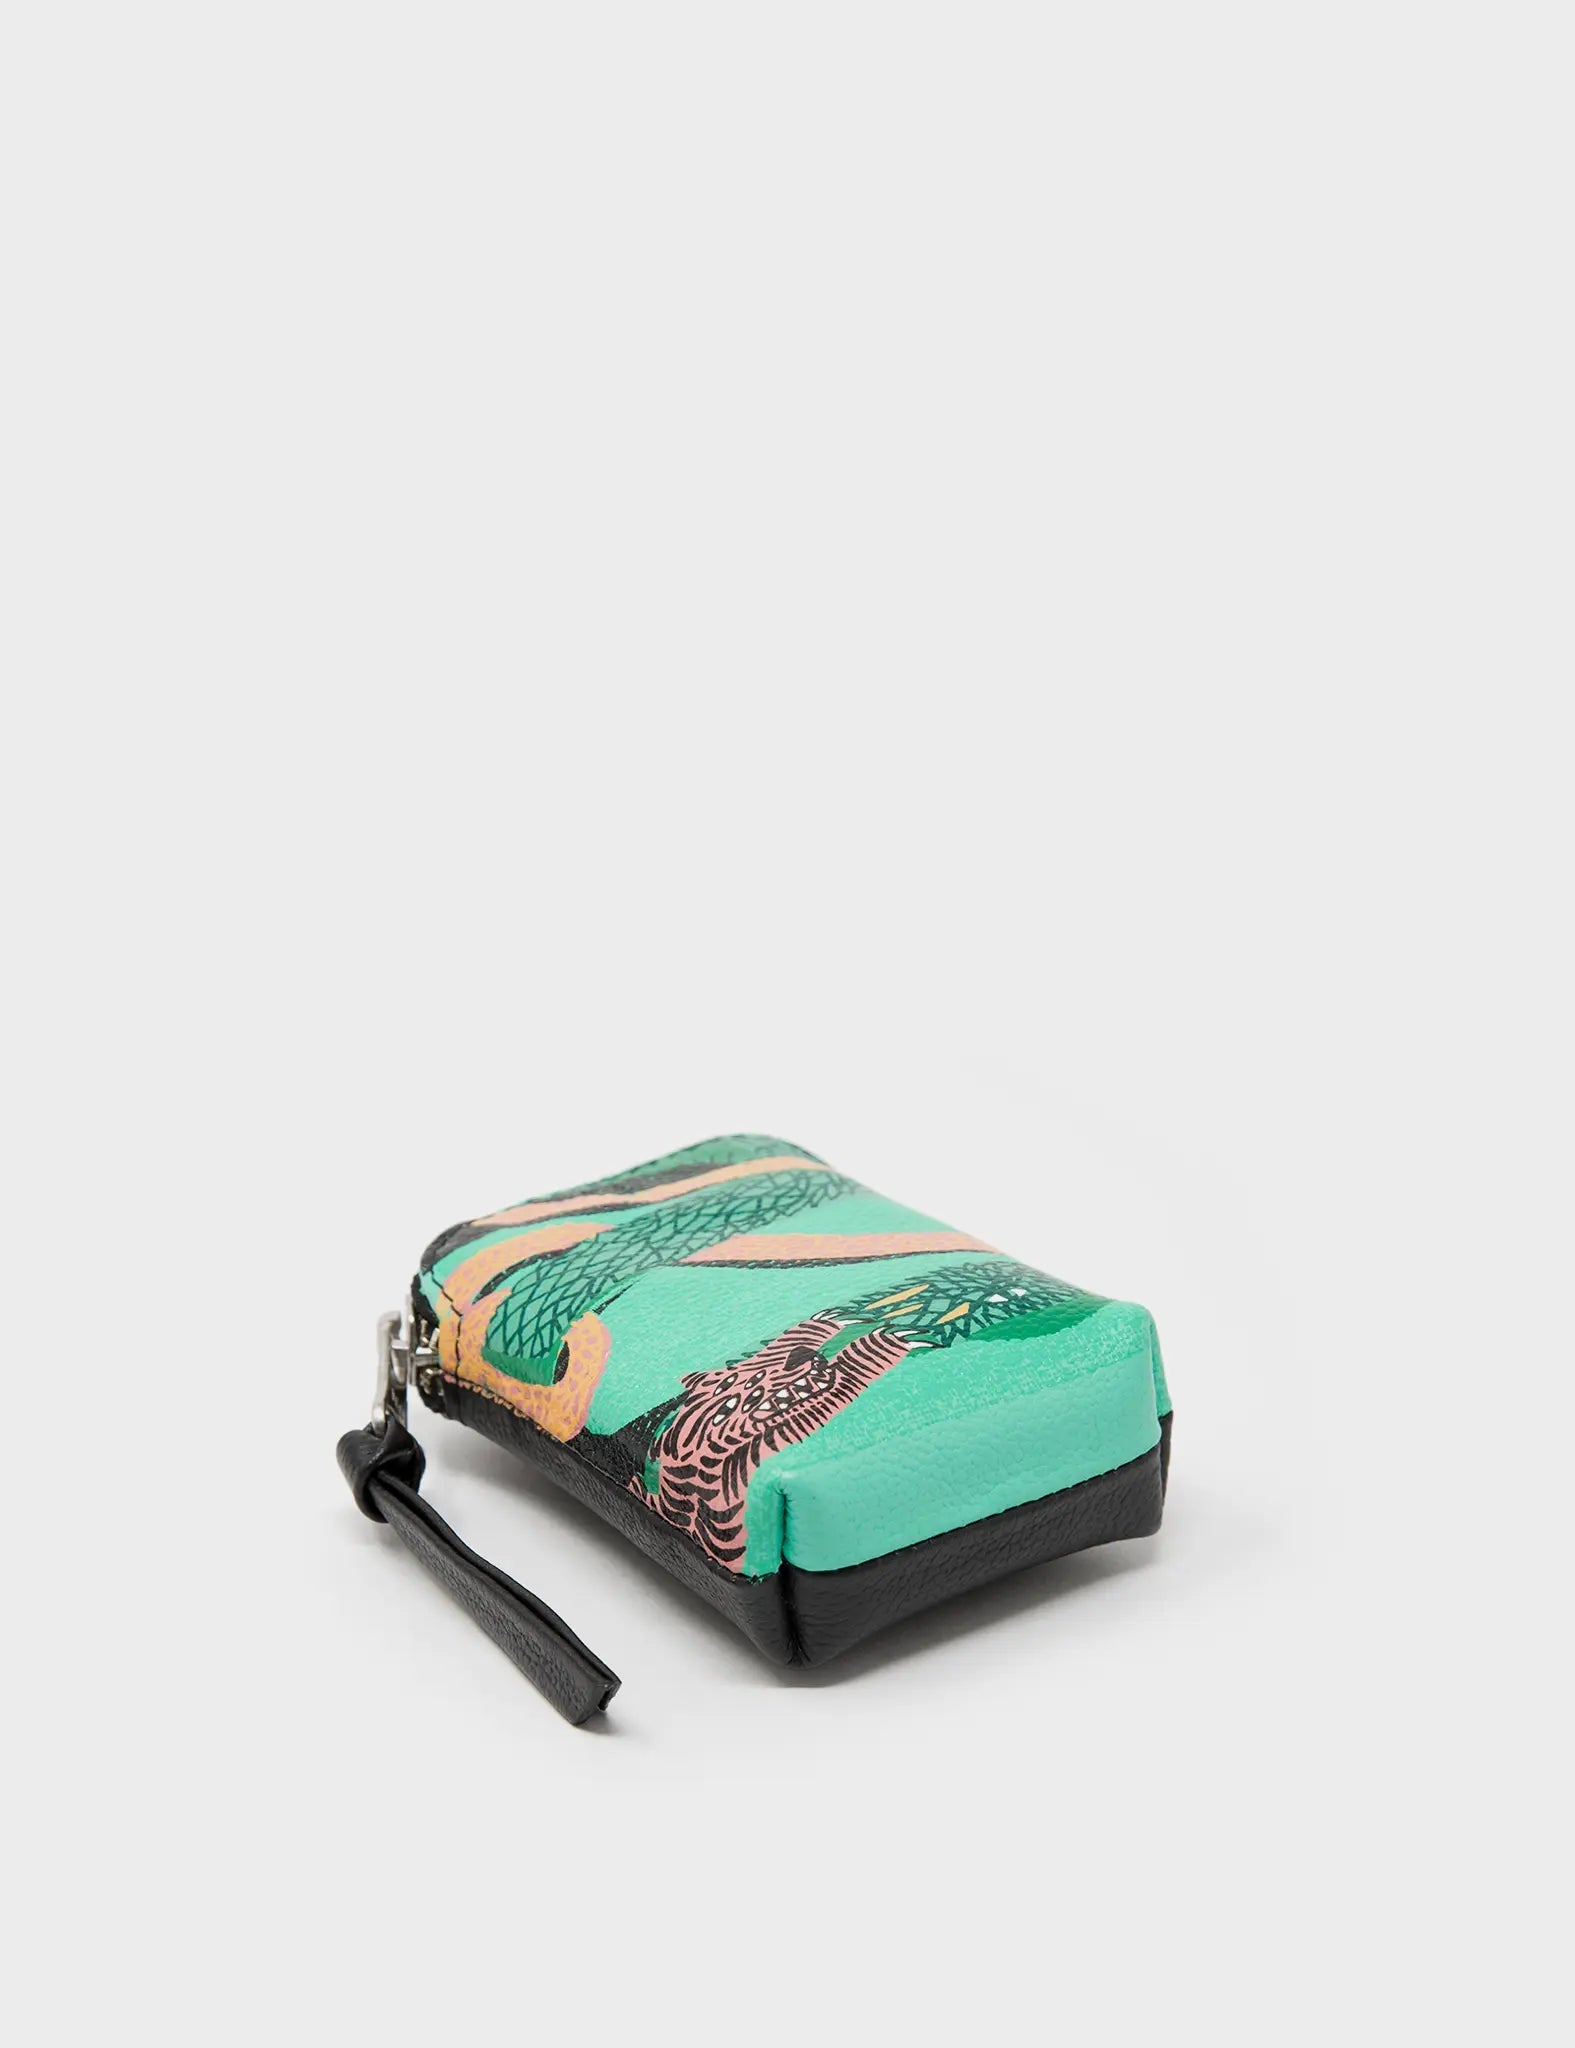 Florence Pouch Charm - Green Leather Keychain Tiger And Snake Print - Close up view